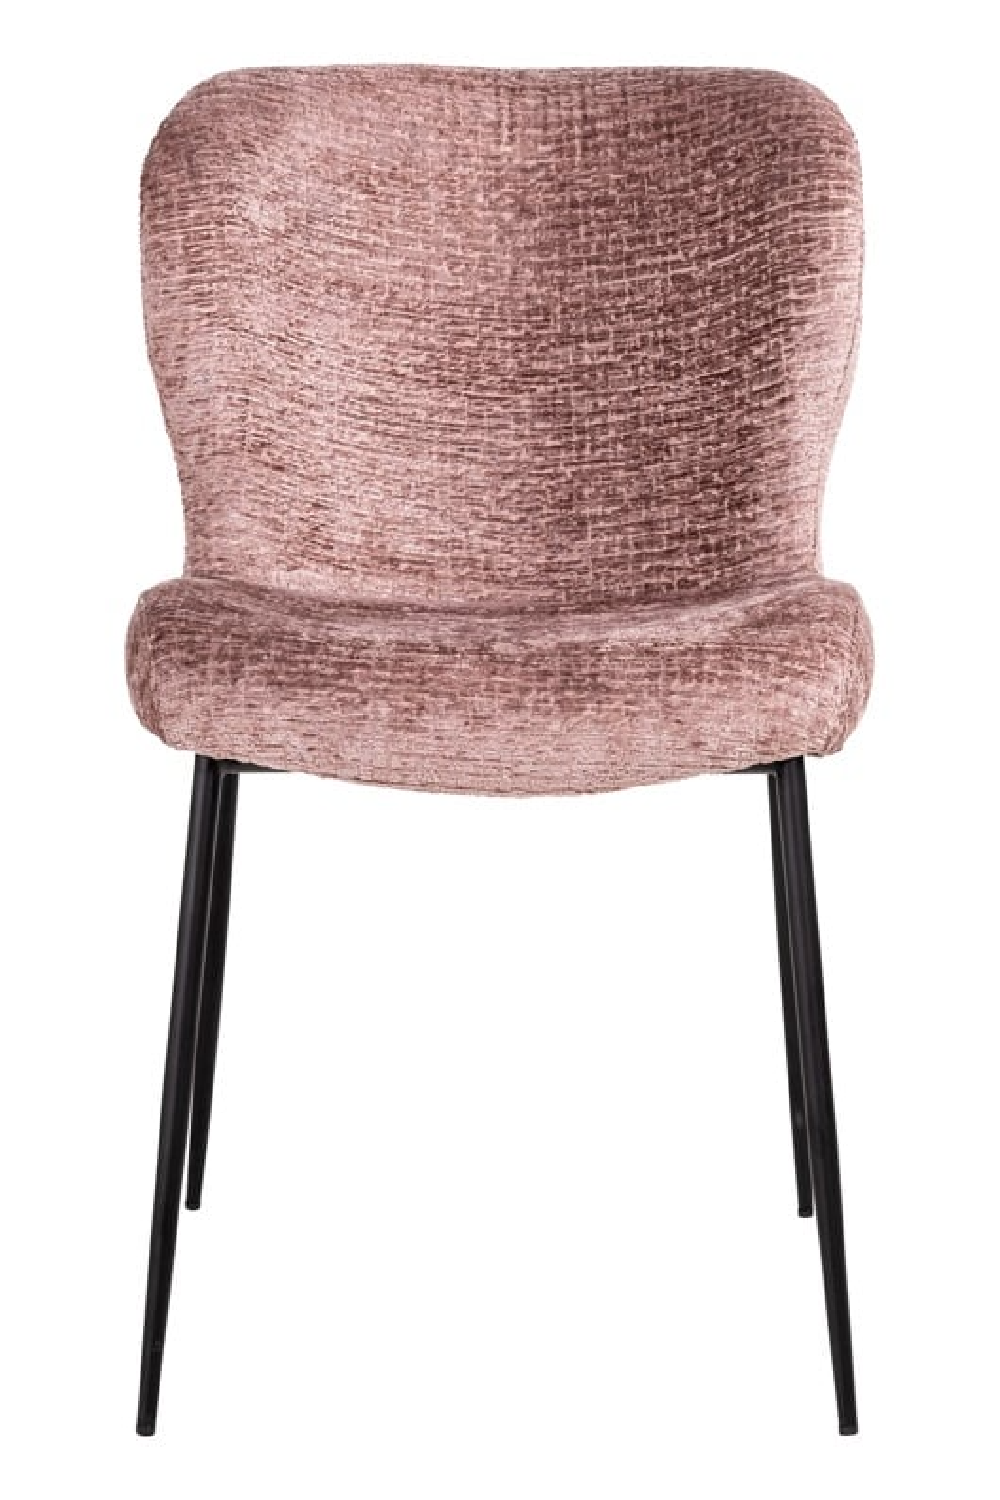 Pink Dining Chair | OROA Darby | Oroa.com